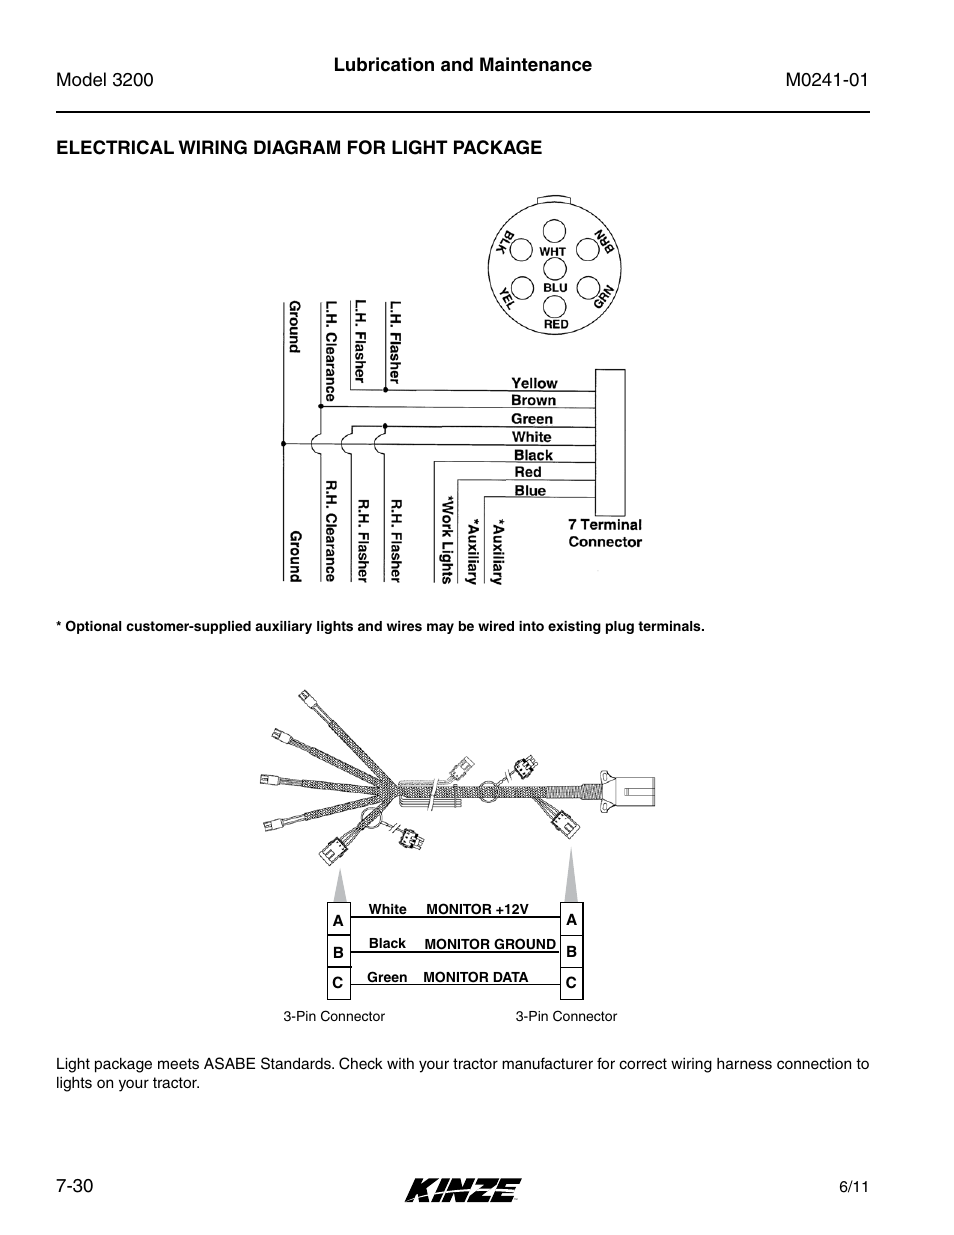 Electrical wiring diagram for light package, Electrical wiring diagram for light package -30 | Kinze 3200 Wing-Fold Planter Rev. 7/14 User Manual | Page 170 / 192